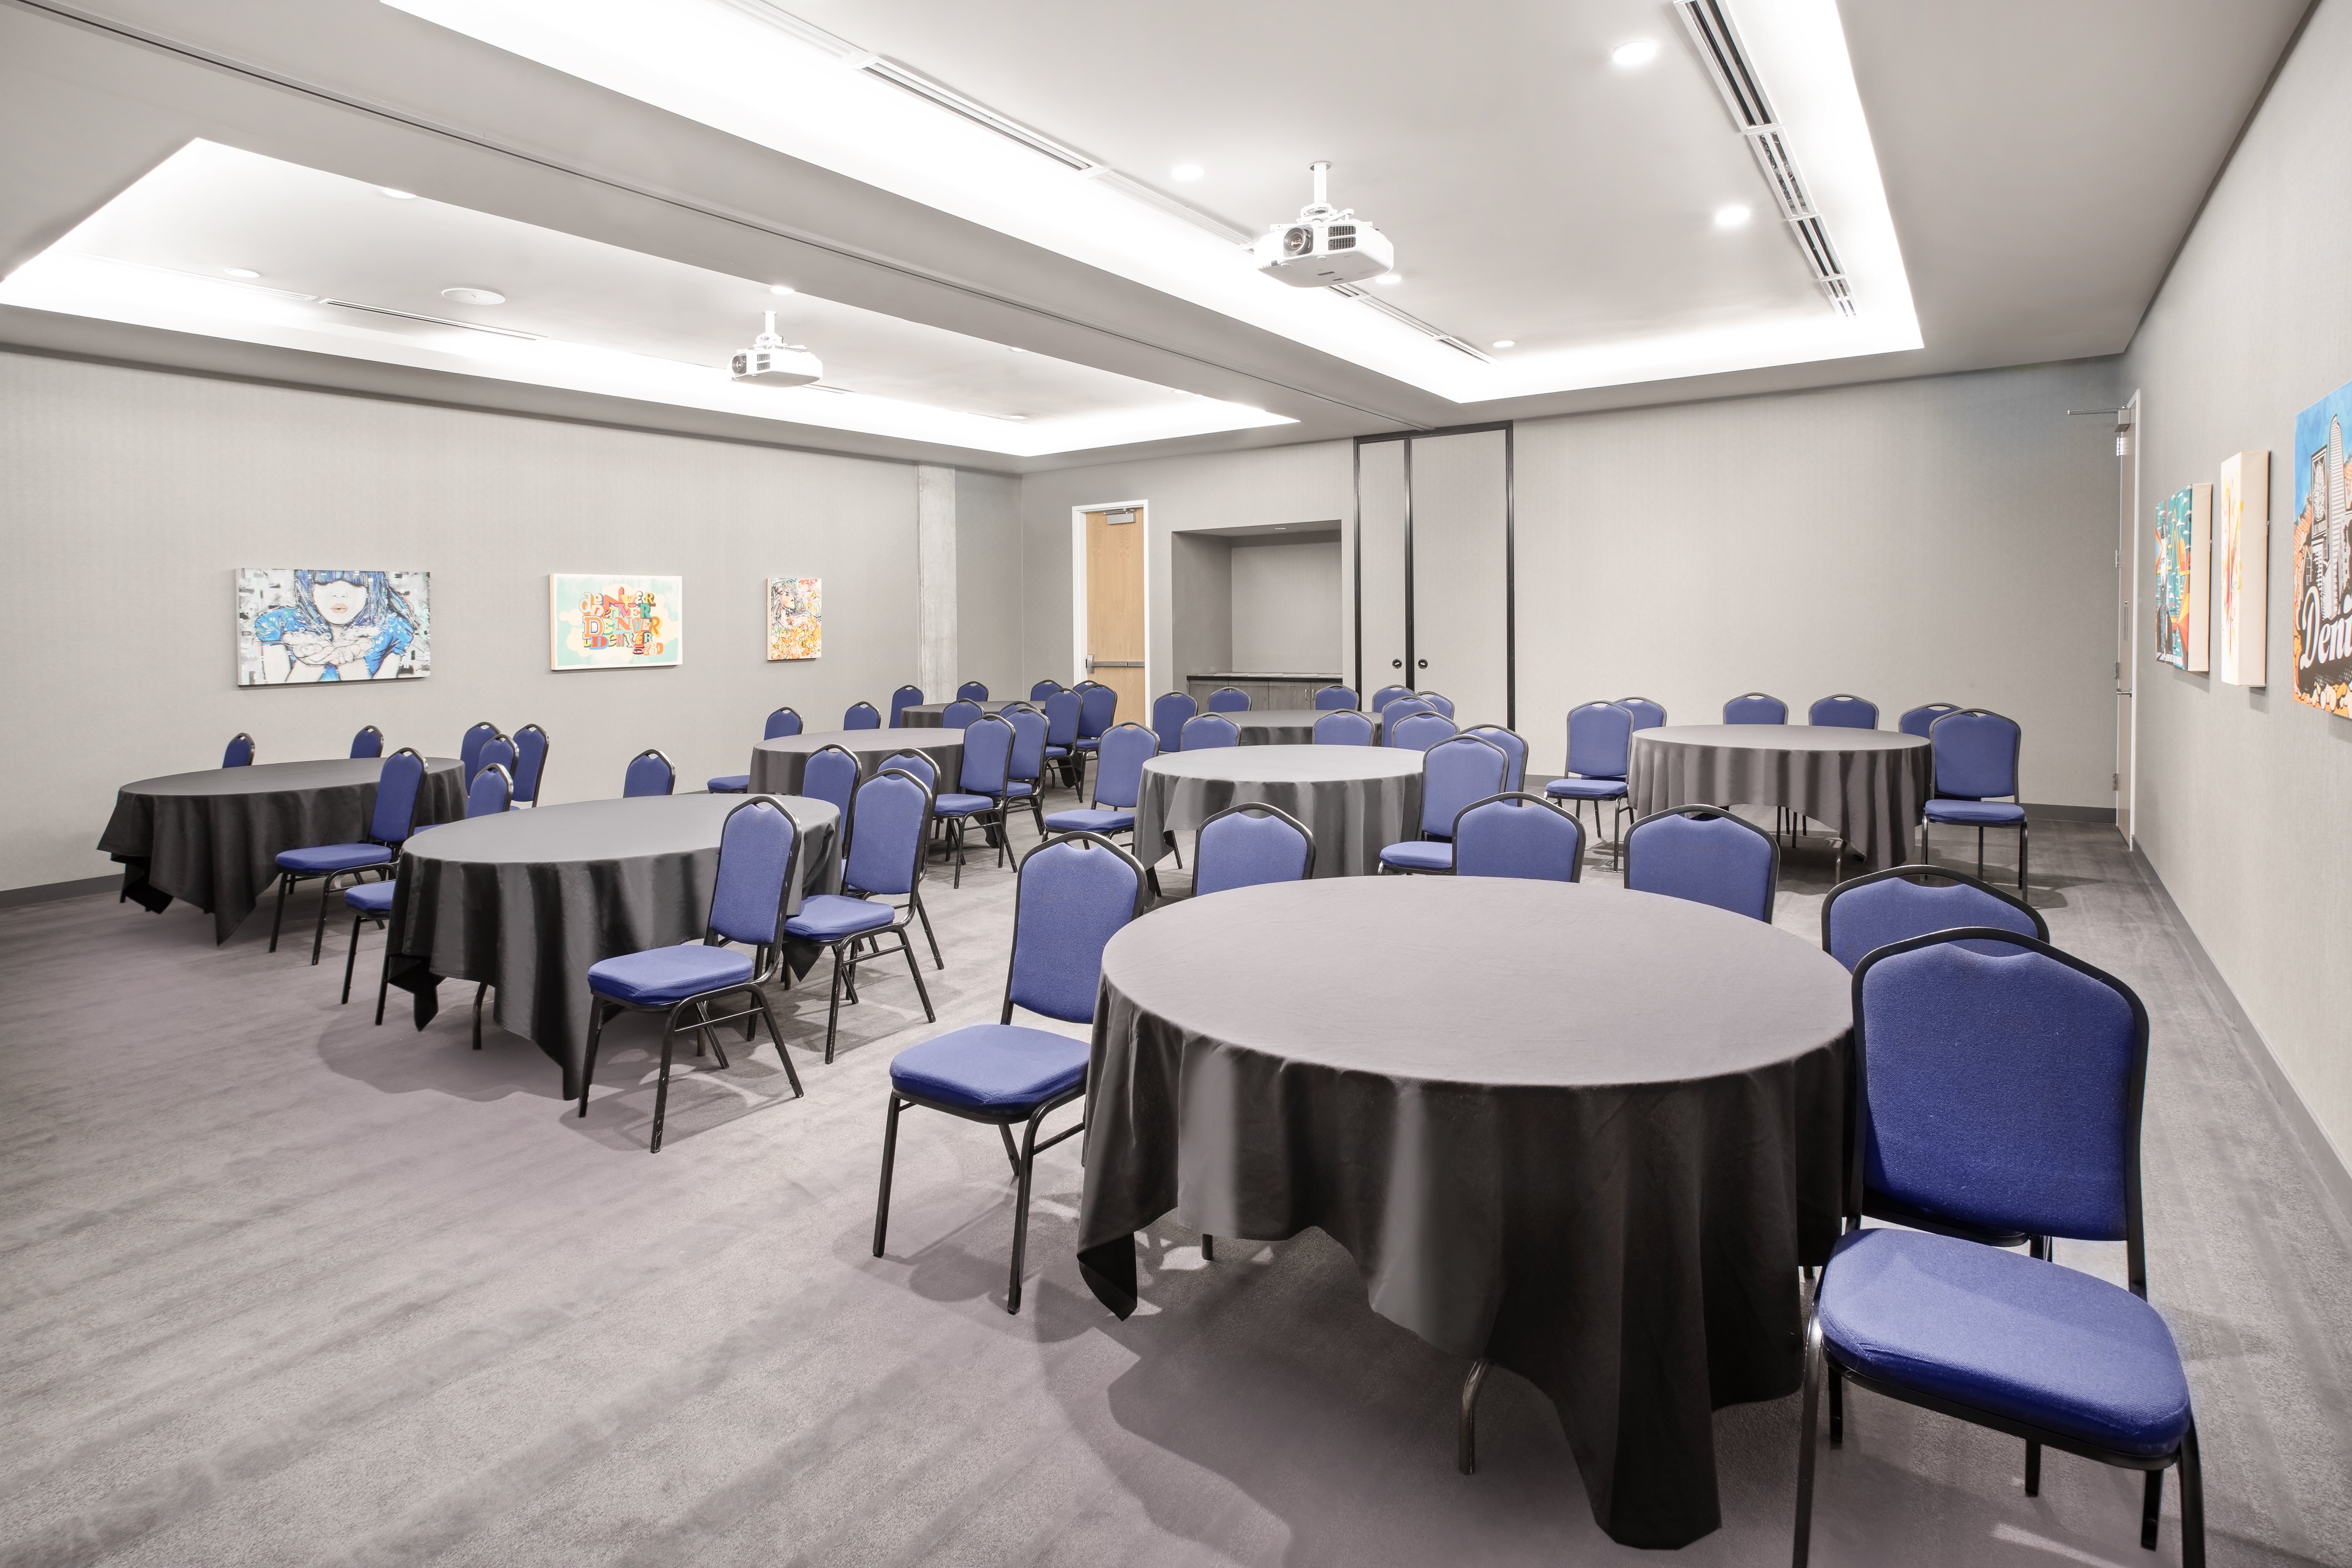 1188 sqft of flexible space with built in projectors and screens